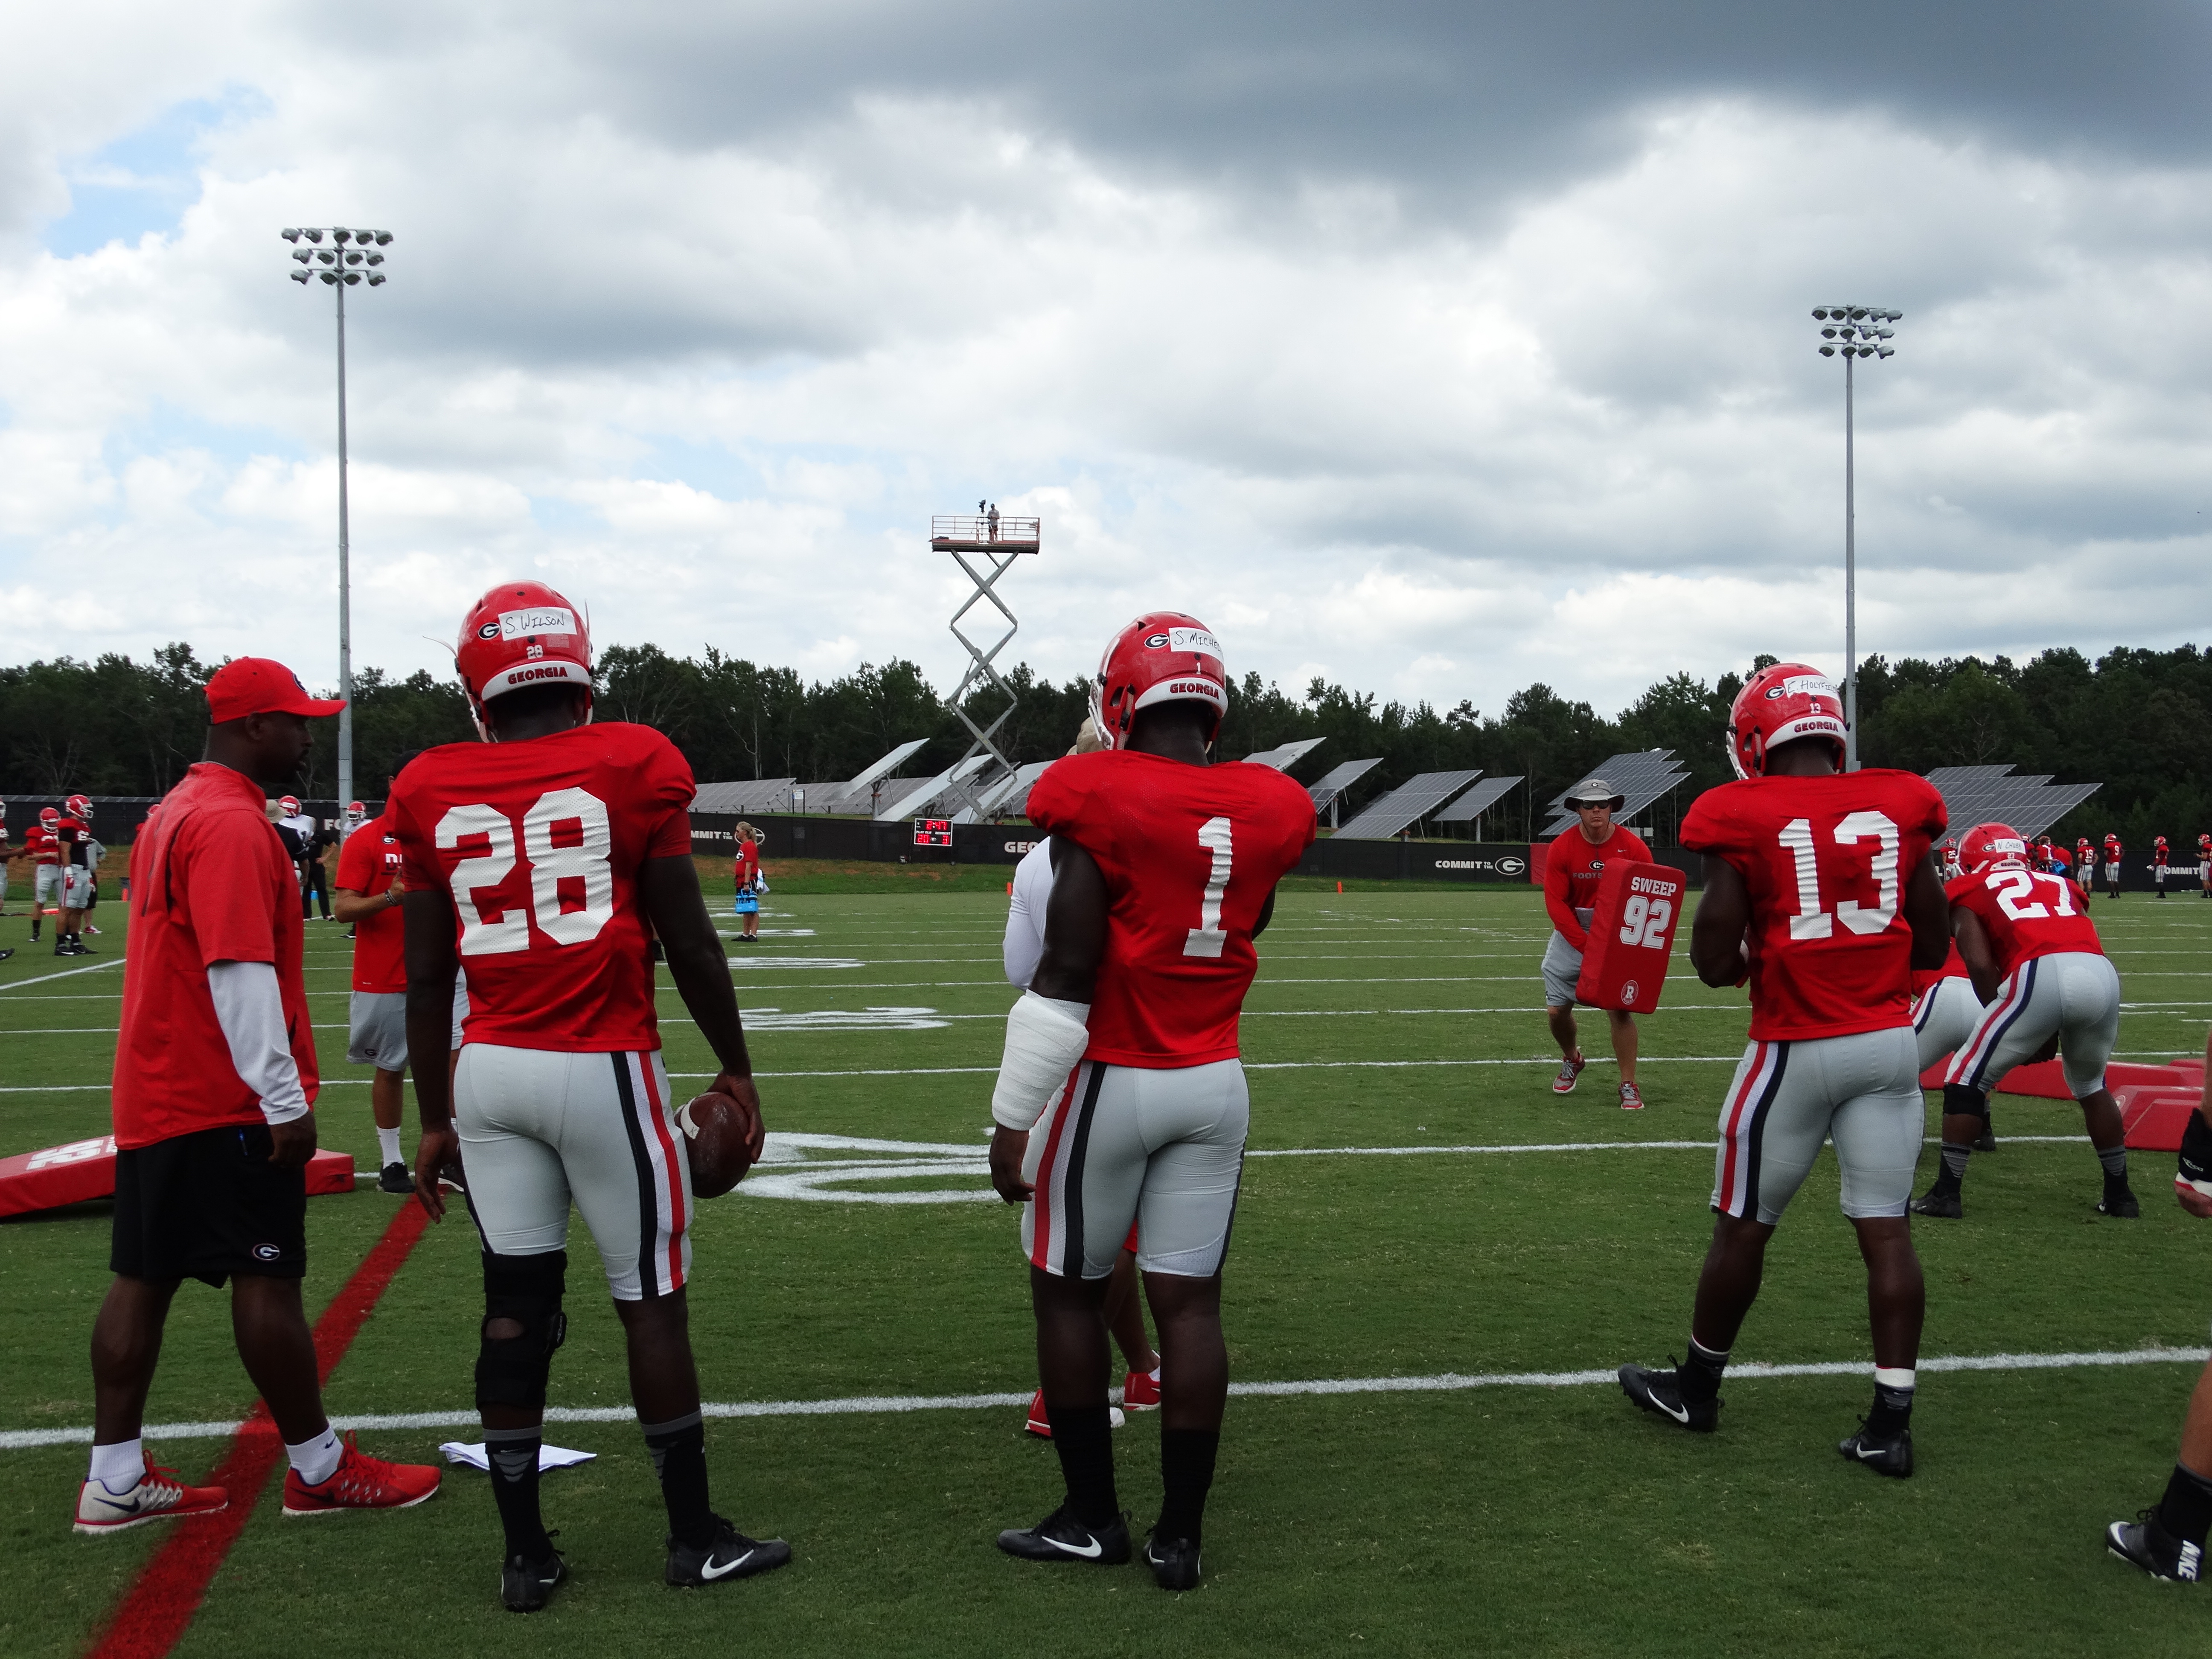 Shaquery Wilson, Sony Michel, Elijah Holyfield, and Nick Chubb during footwork drills